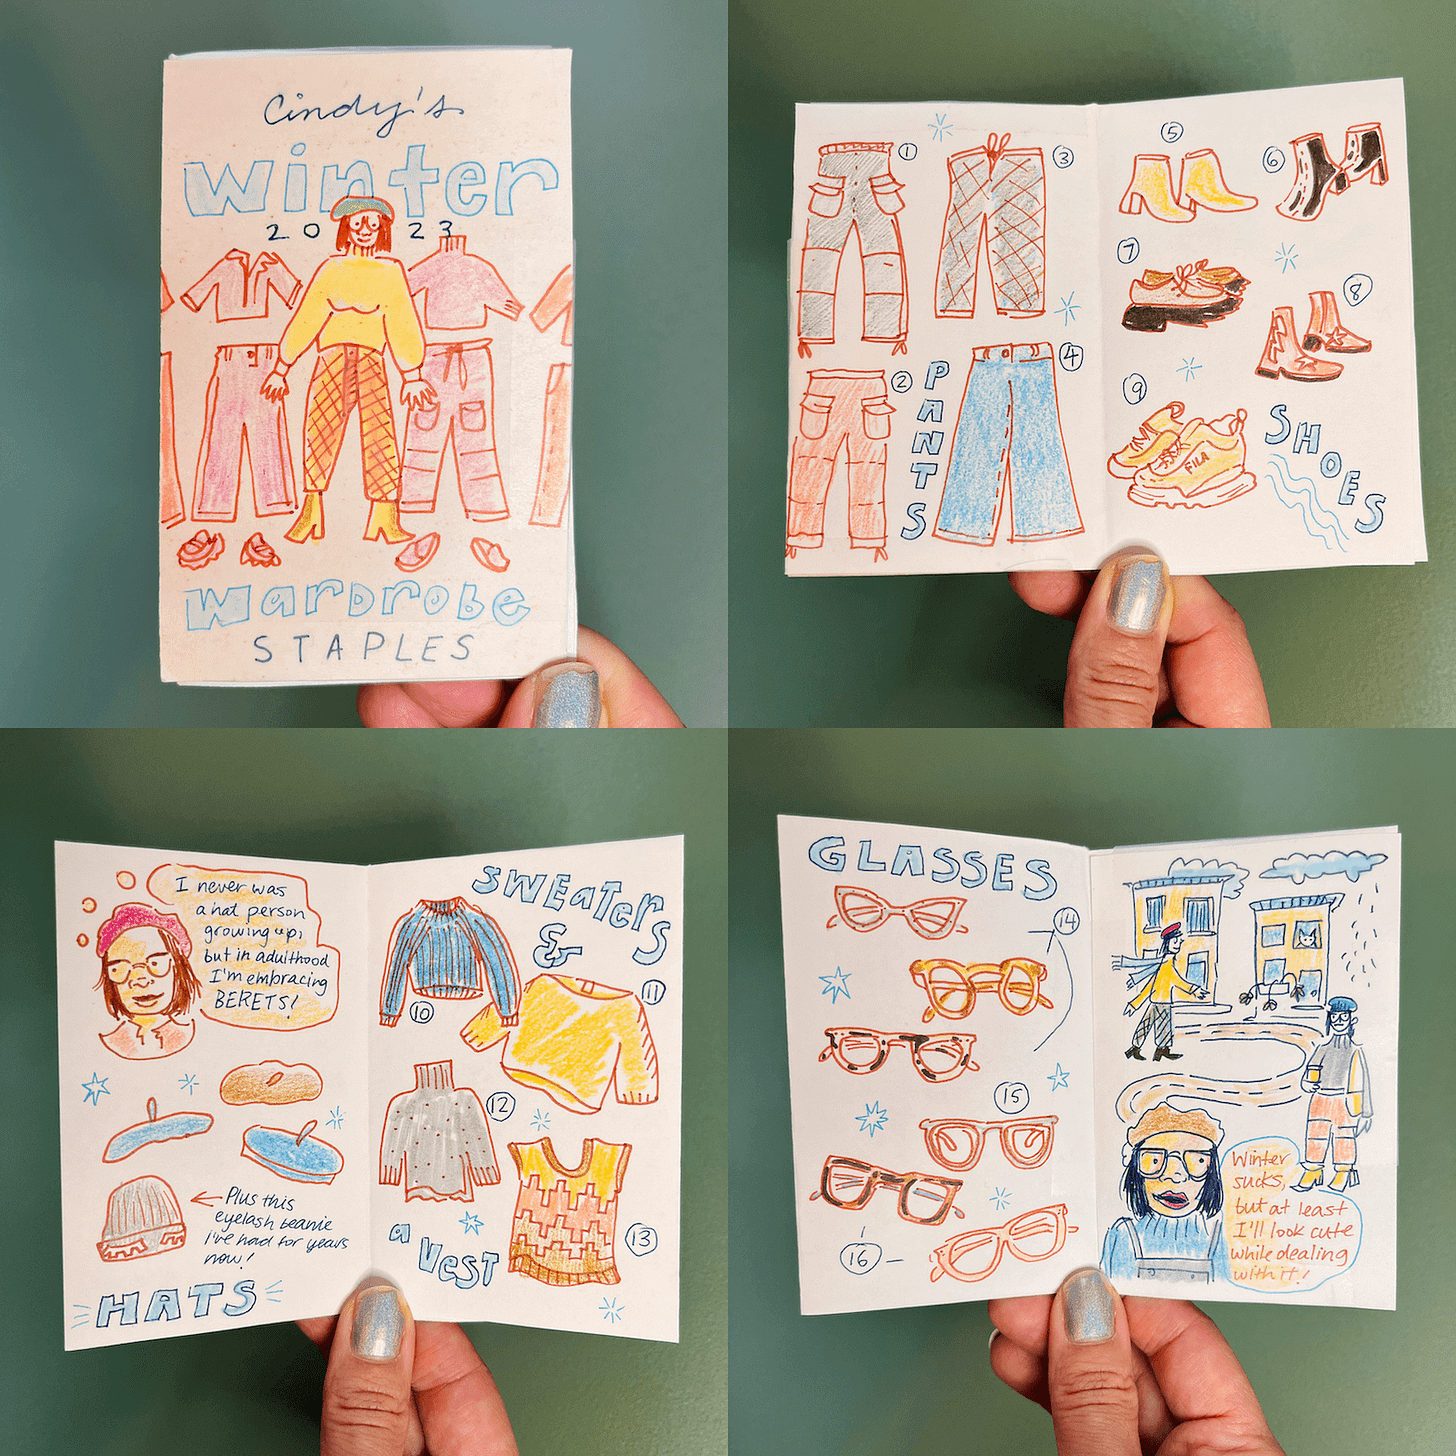 Four photos of an 8-page mini-zine featuring winter wardrobe stapes like cargo pants, beloved metallic boots, berets, and many pairs of glasses.